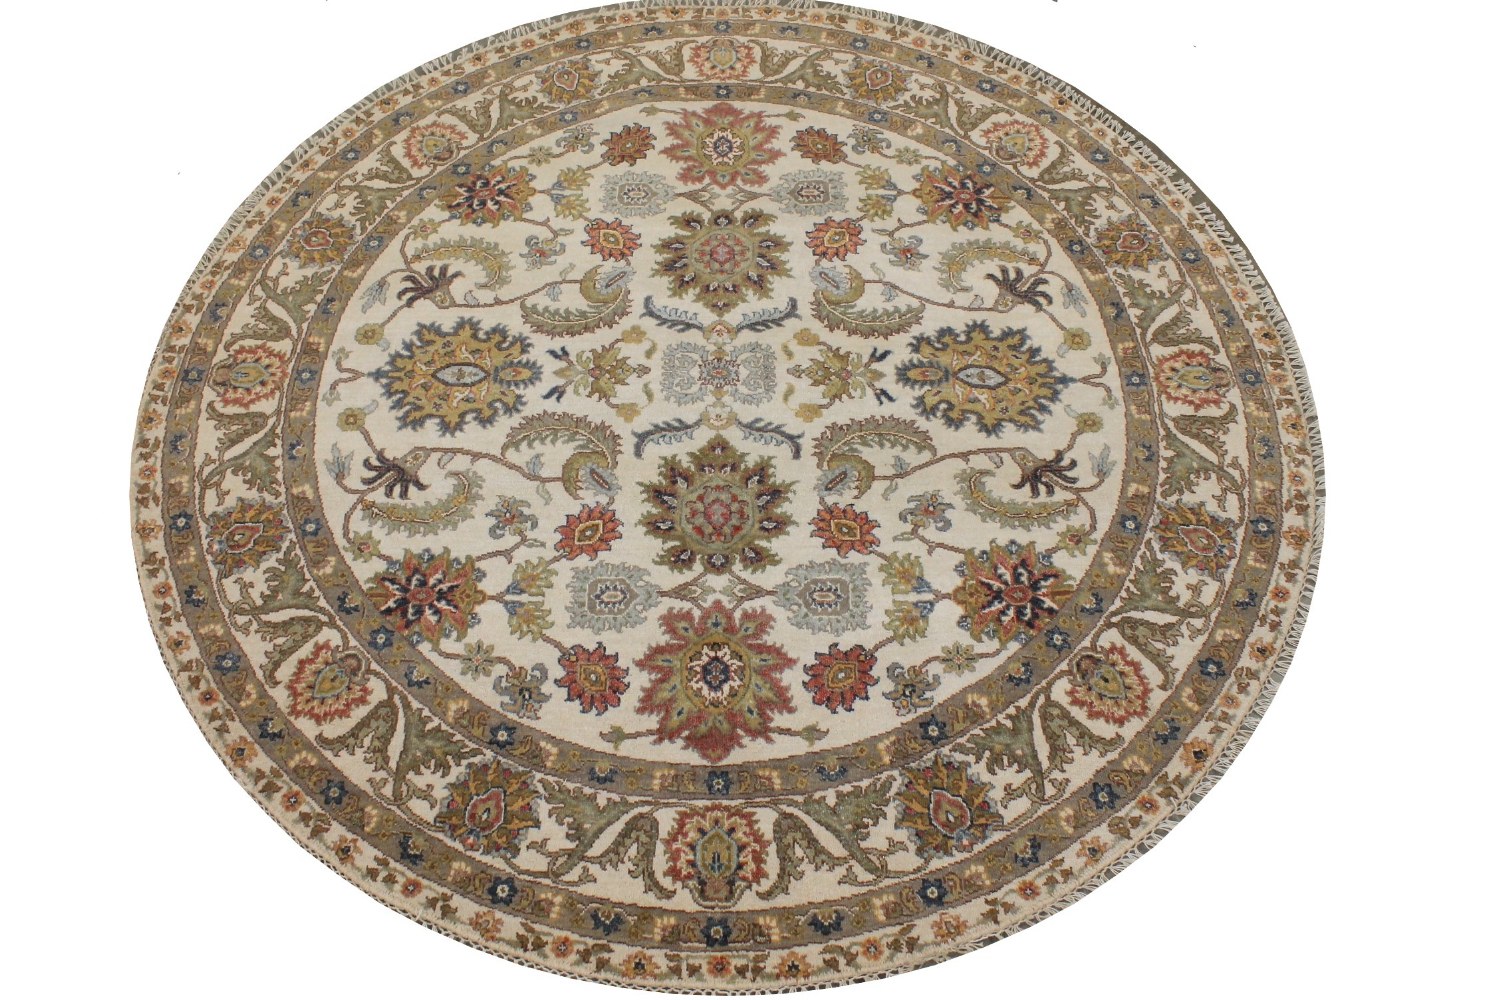 6 ft. - 7 ft. Round & Square Traditional Hand Knotted Wool Area Rug - MR028718